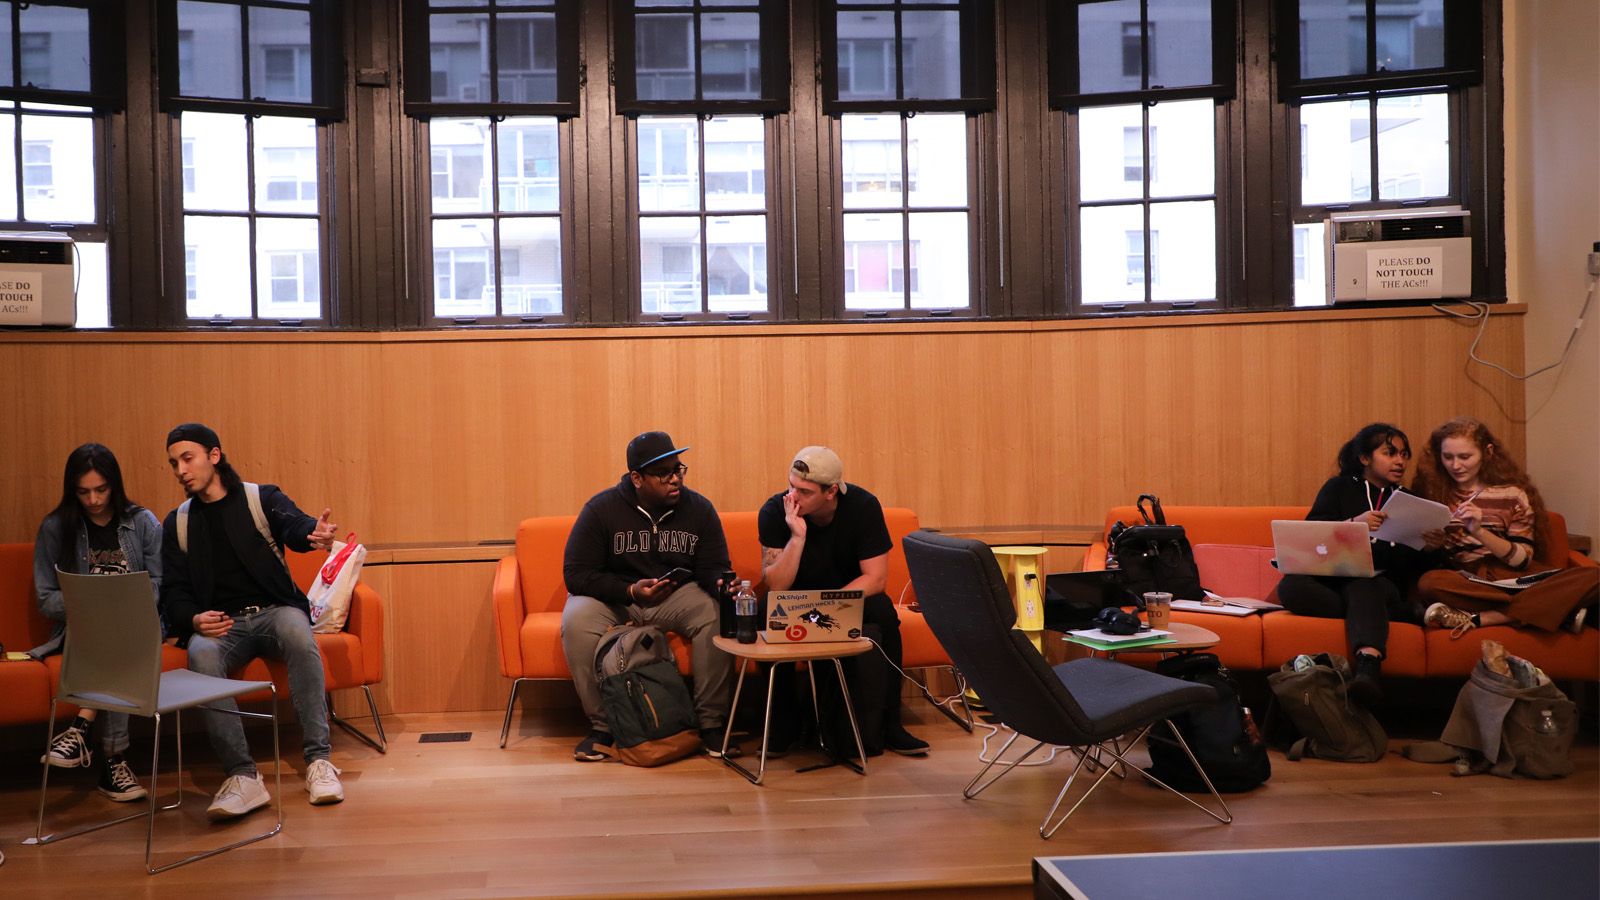 Students relaxing in the new Student Union